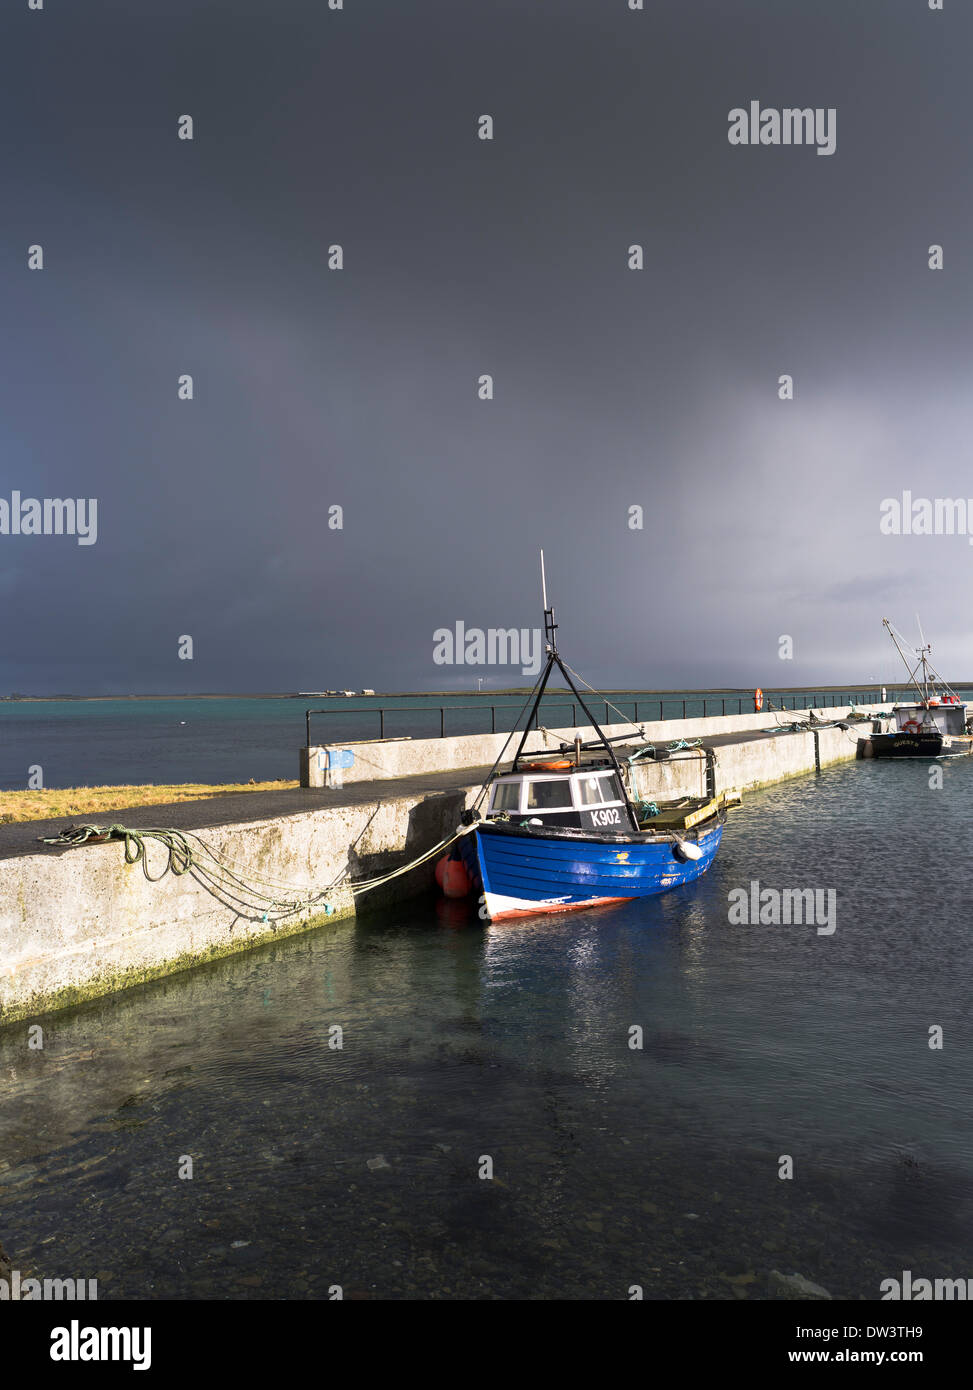 dh Kettletoft harbour SANDAY ORKNEY Gathering storm approaching fishing boat pier scotland clouds orkneys uk bad weather sea boats sunny Stock Photo